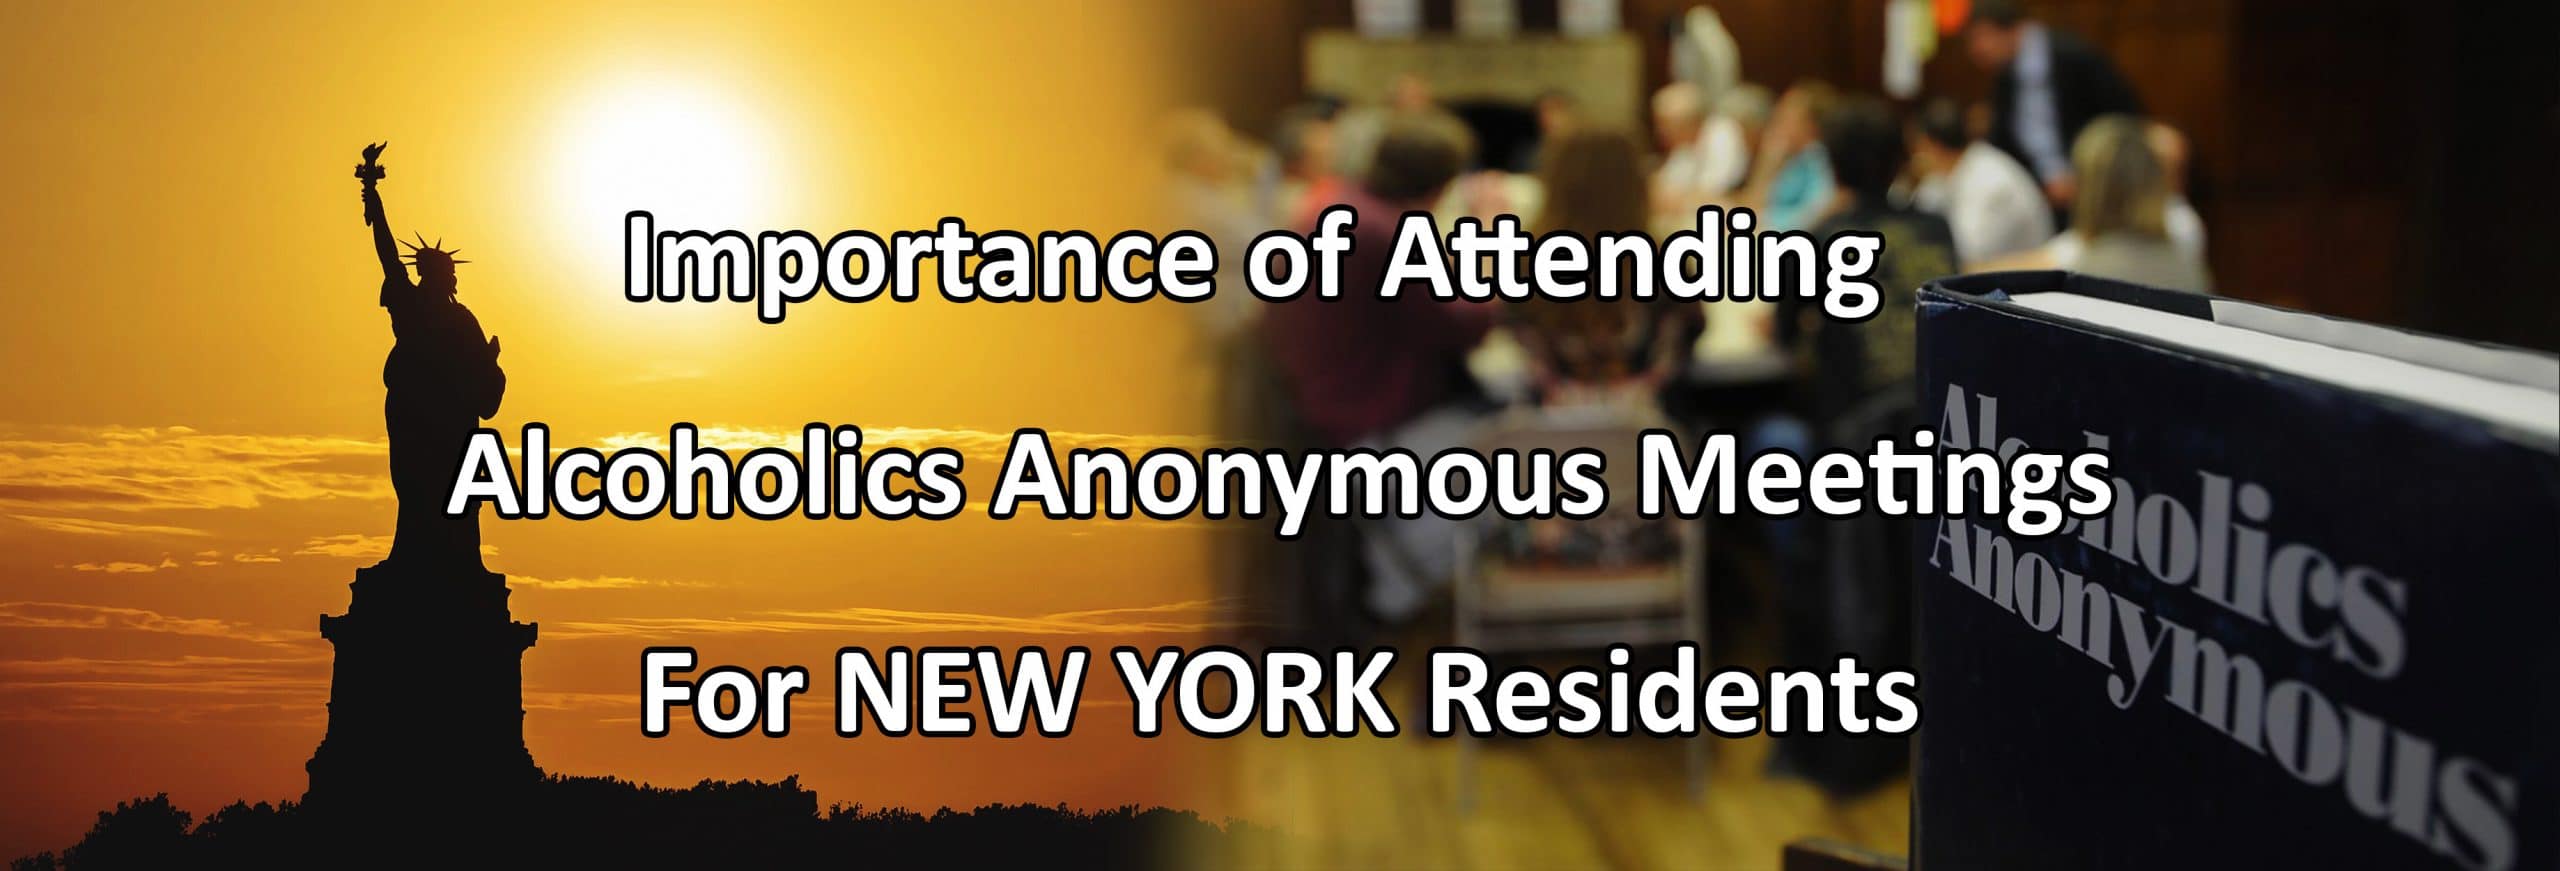 Importance of Attending Alcoholics Anonymous Meetings For New York Residents